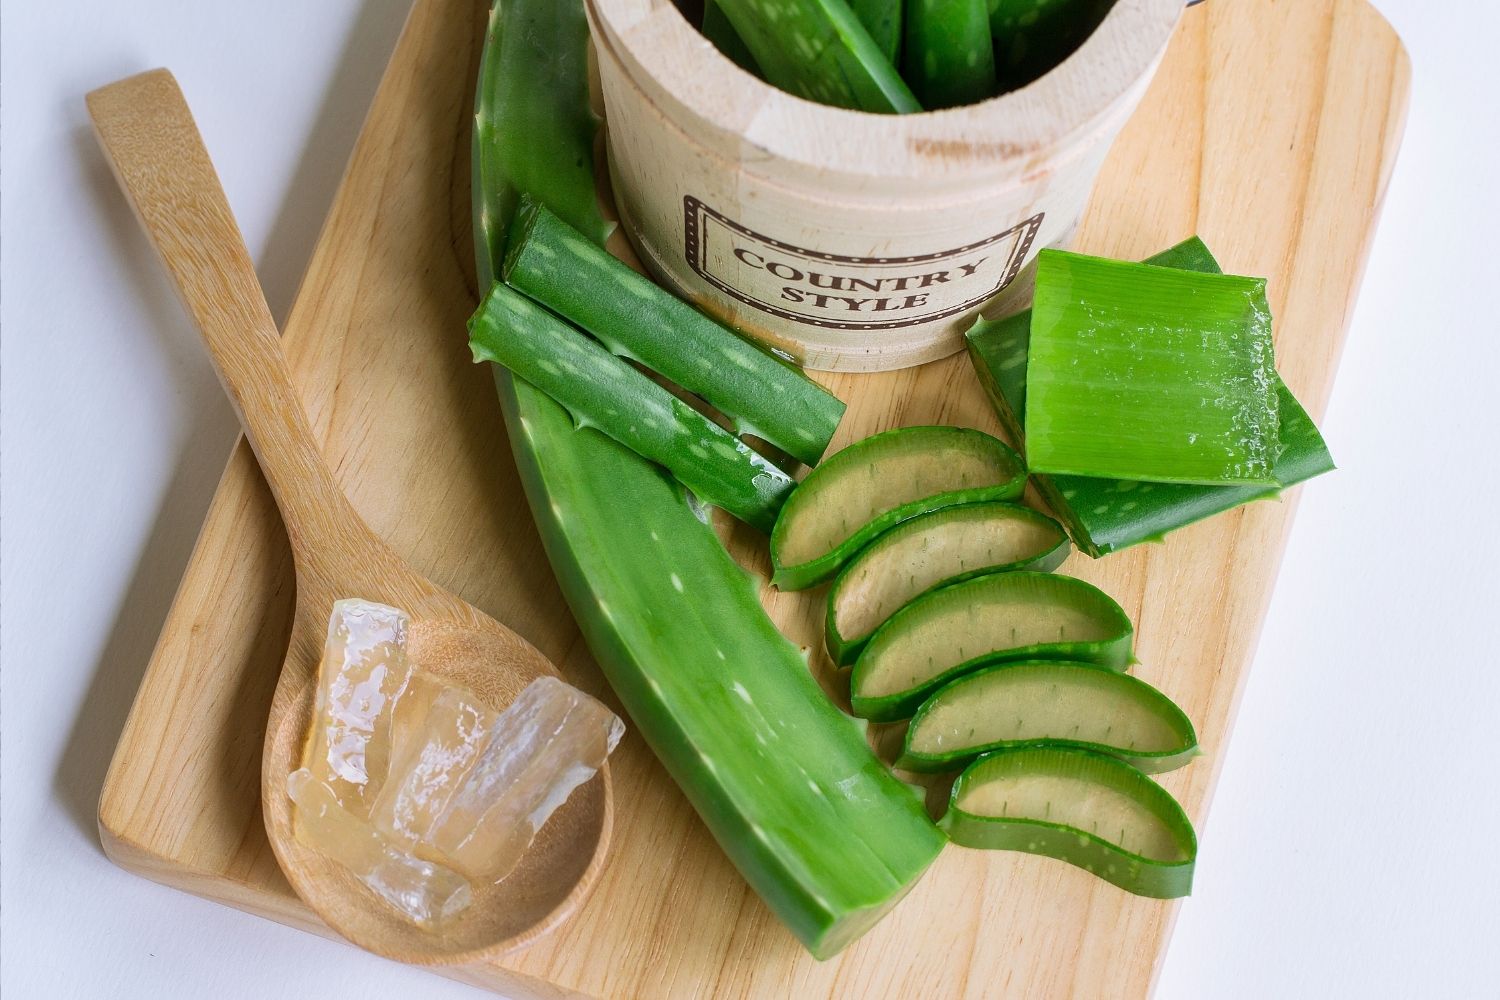 Benefits of using aloe vera for the skin